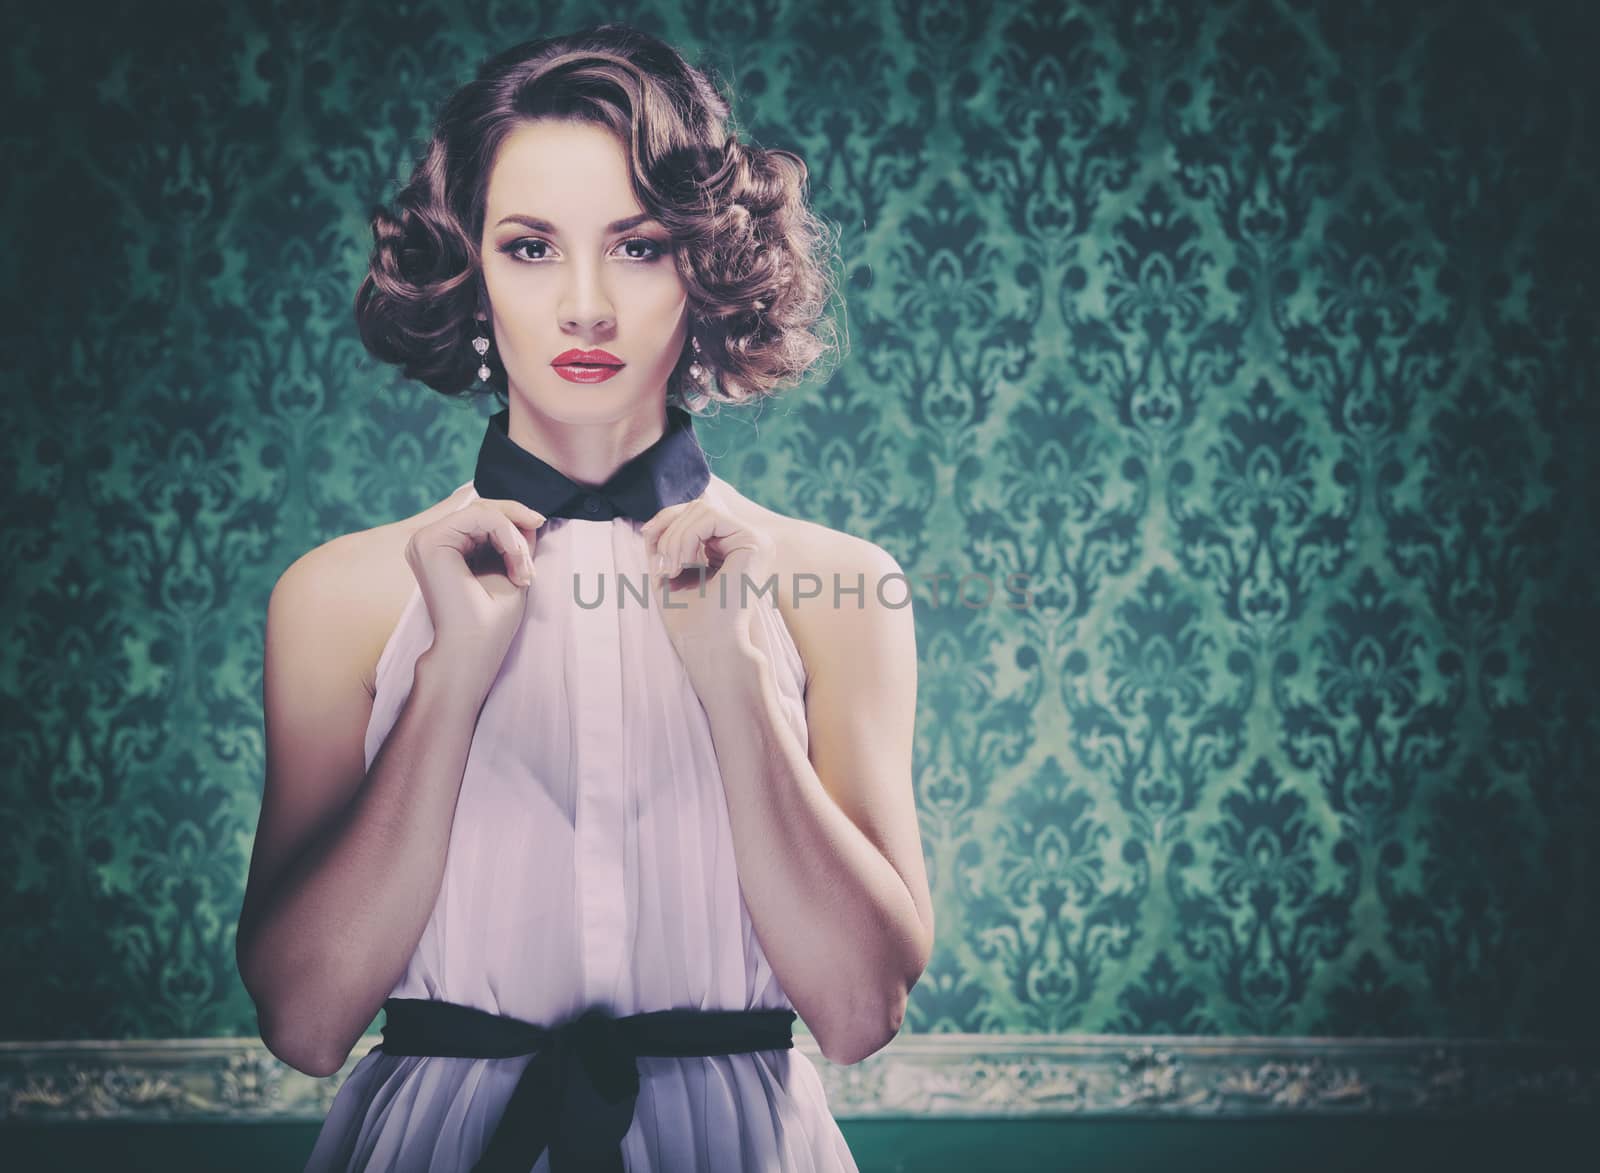 Gorgeous woman on vintage type wall with retro look. Vintage image and retro cameras type toning